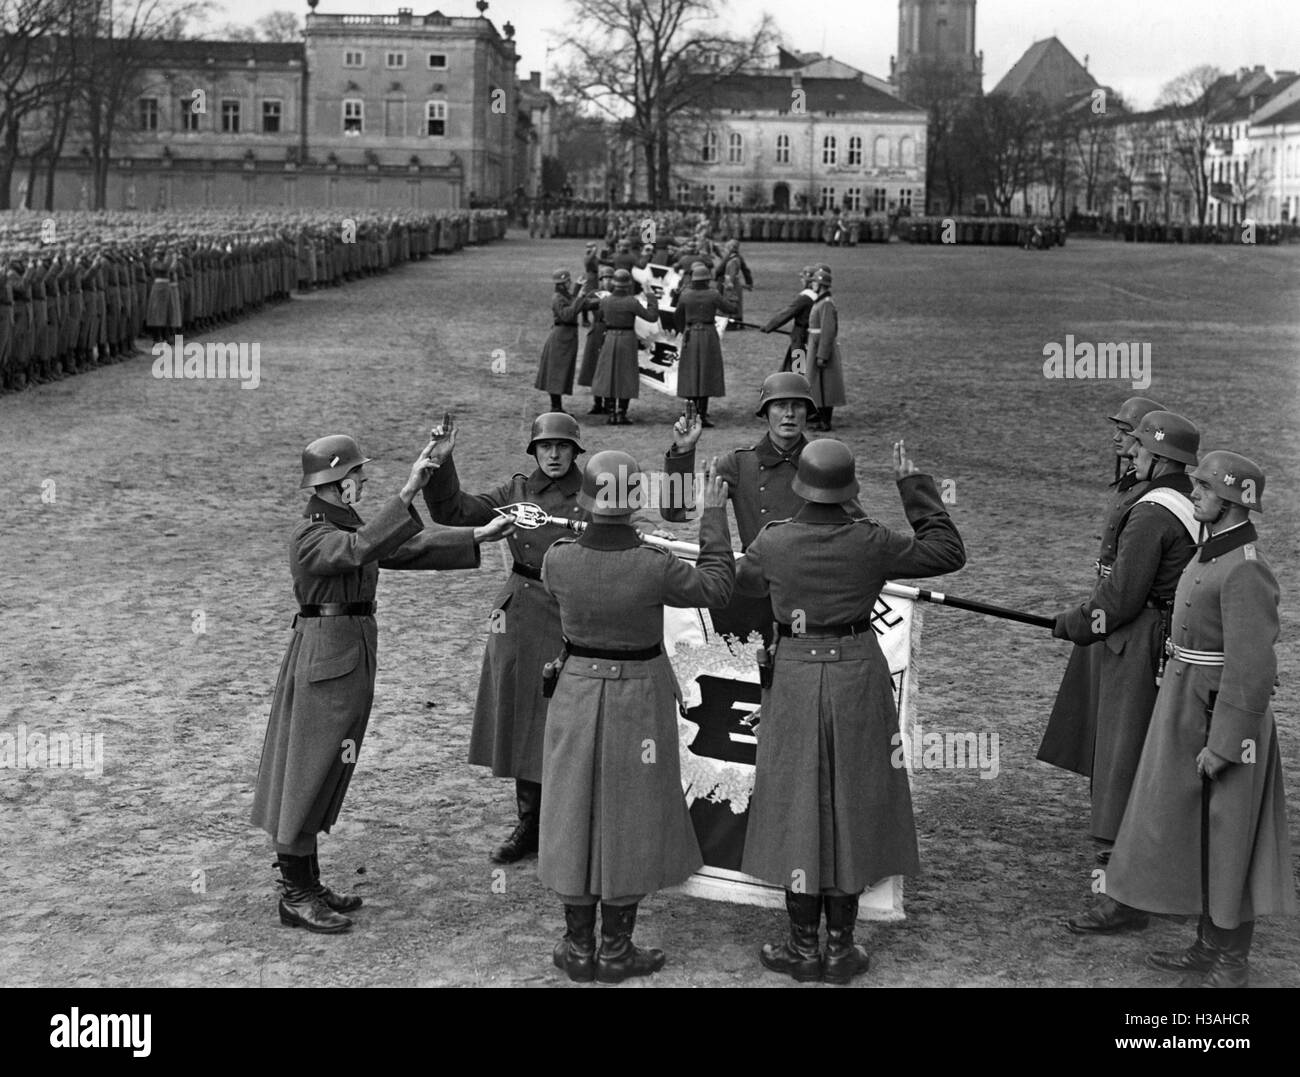 Swearing-in of recruits in the Lustgarten in Potsdam, 1937 Stock Photo